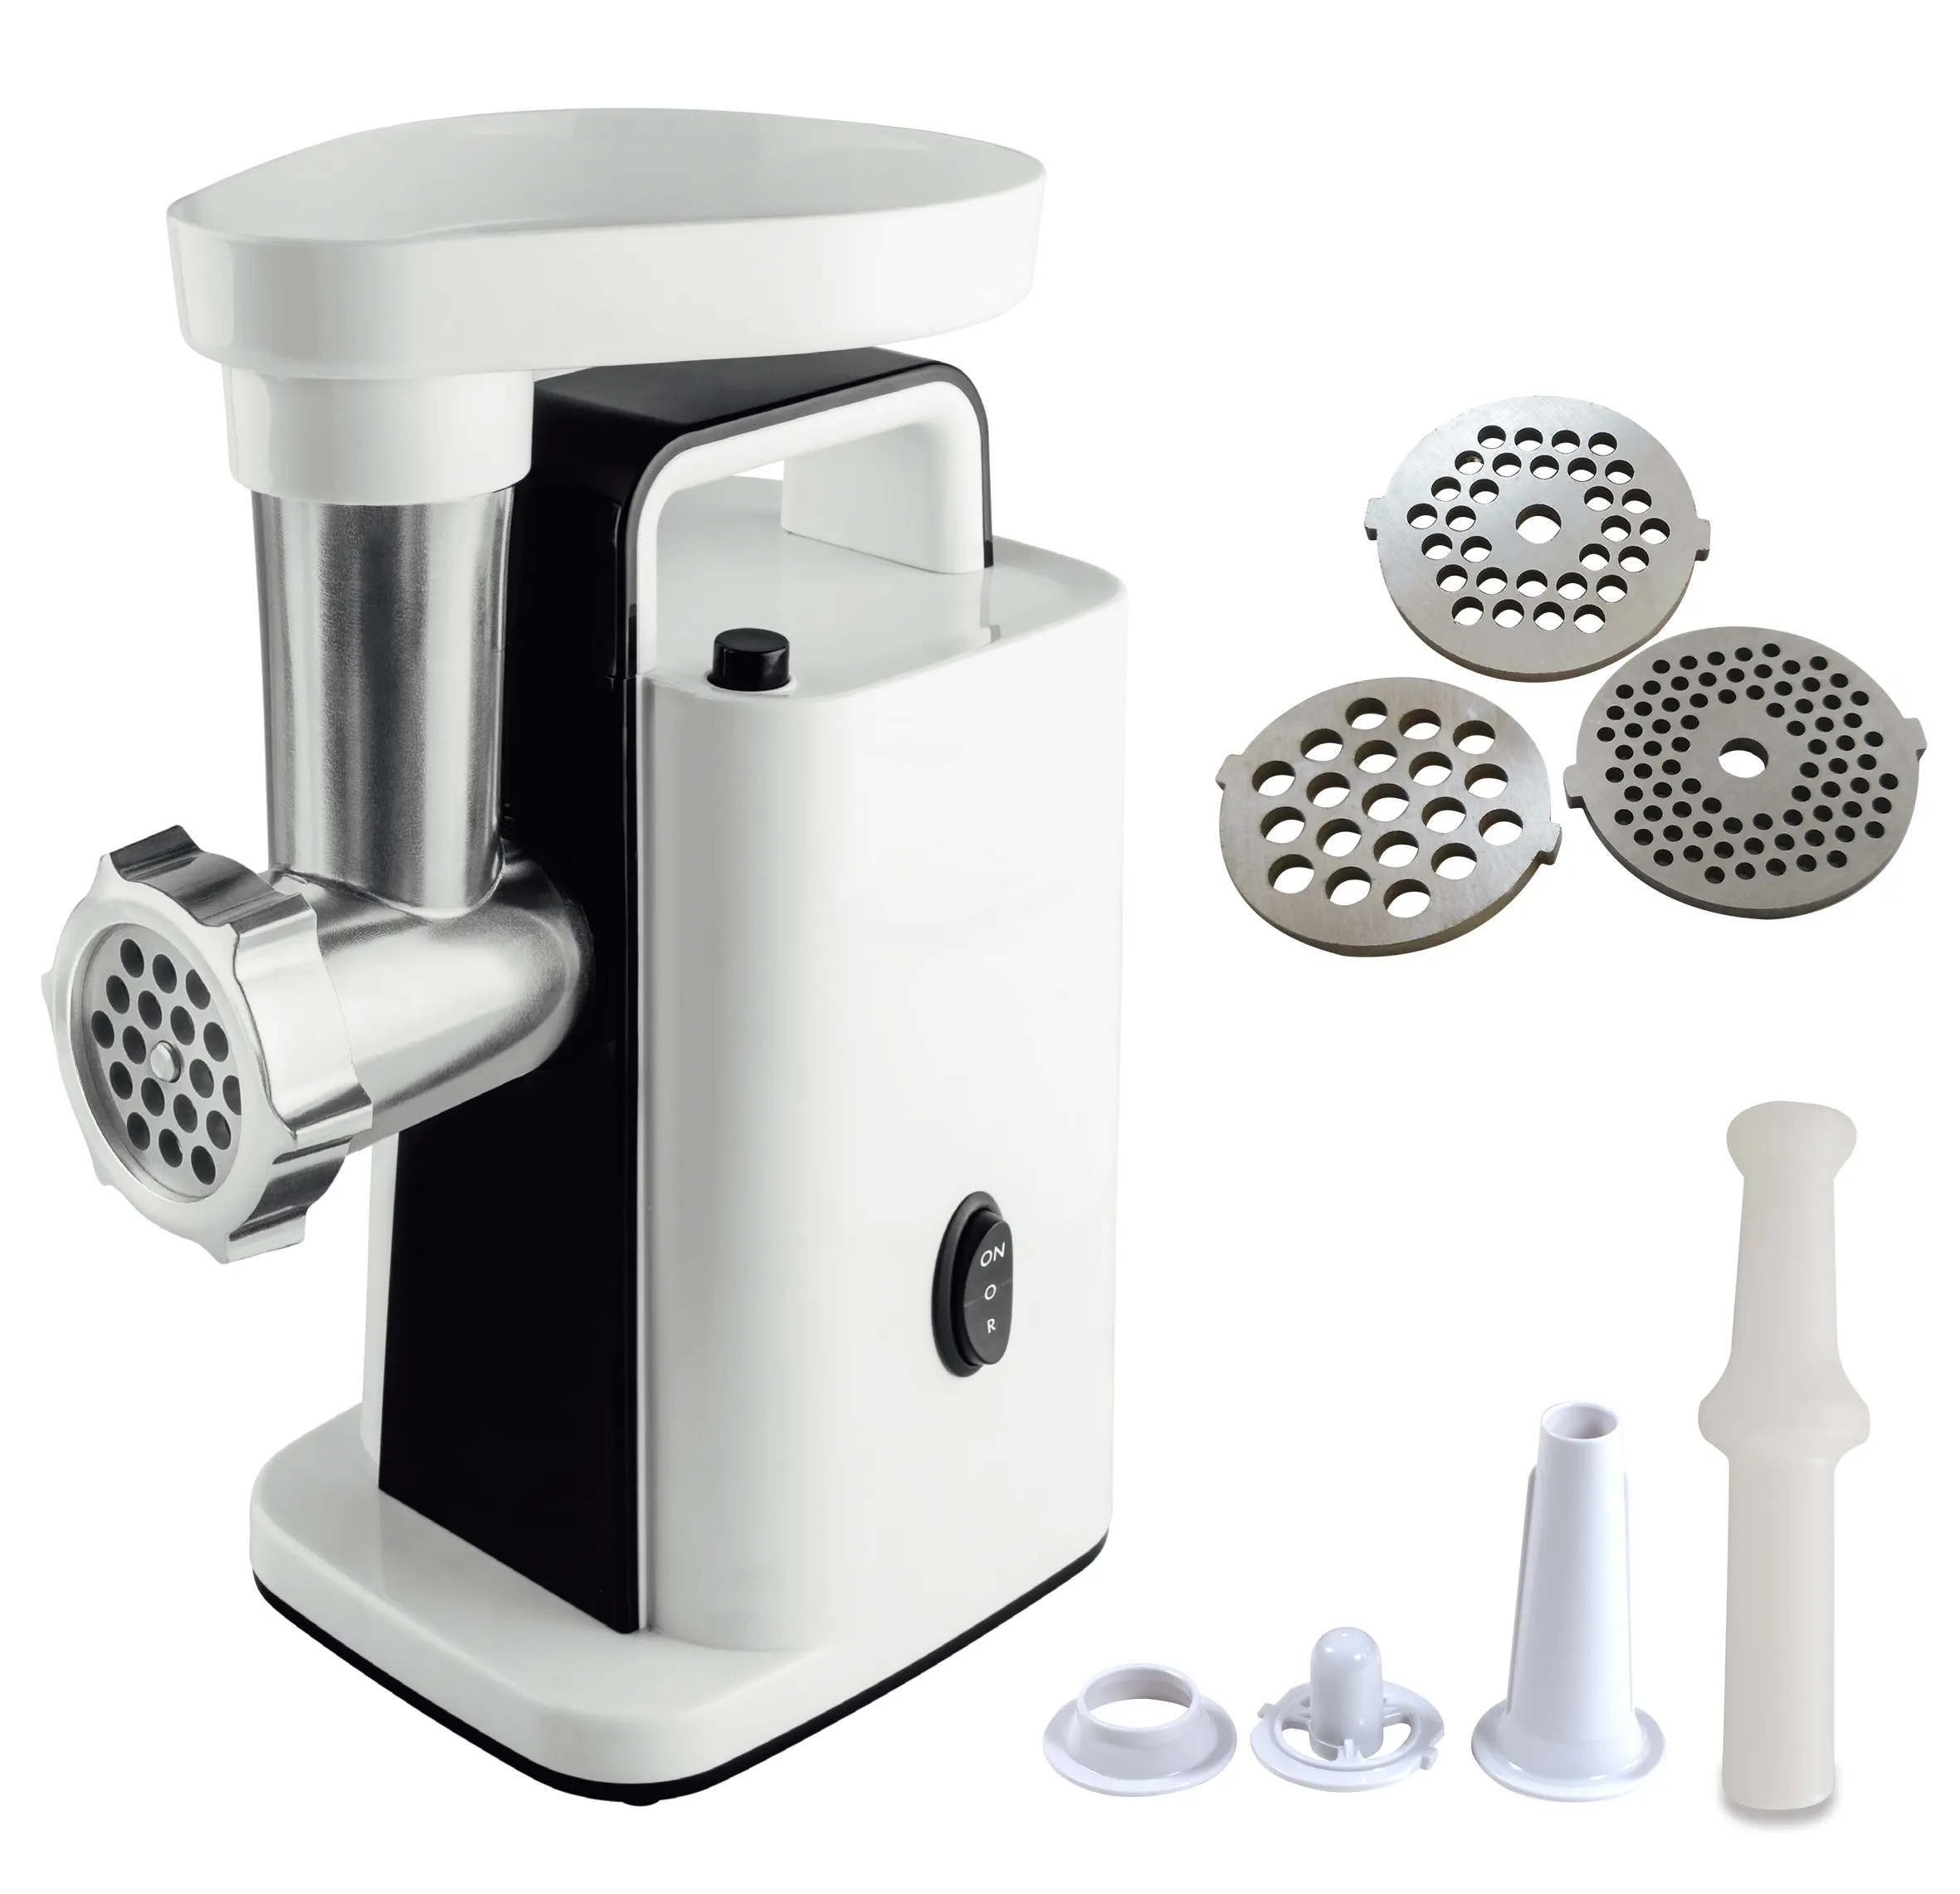 Small Portable Meat Grinder 800W AMG25 Metal Gear Brand New with Handle DC Motor 1000W